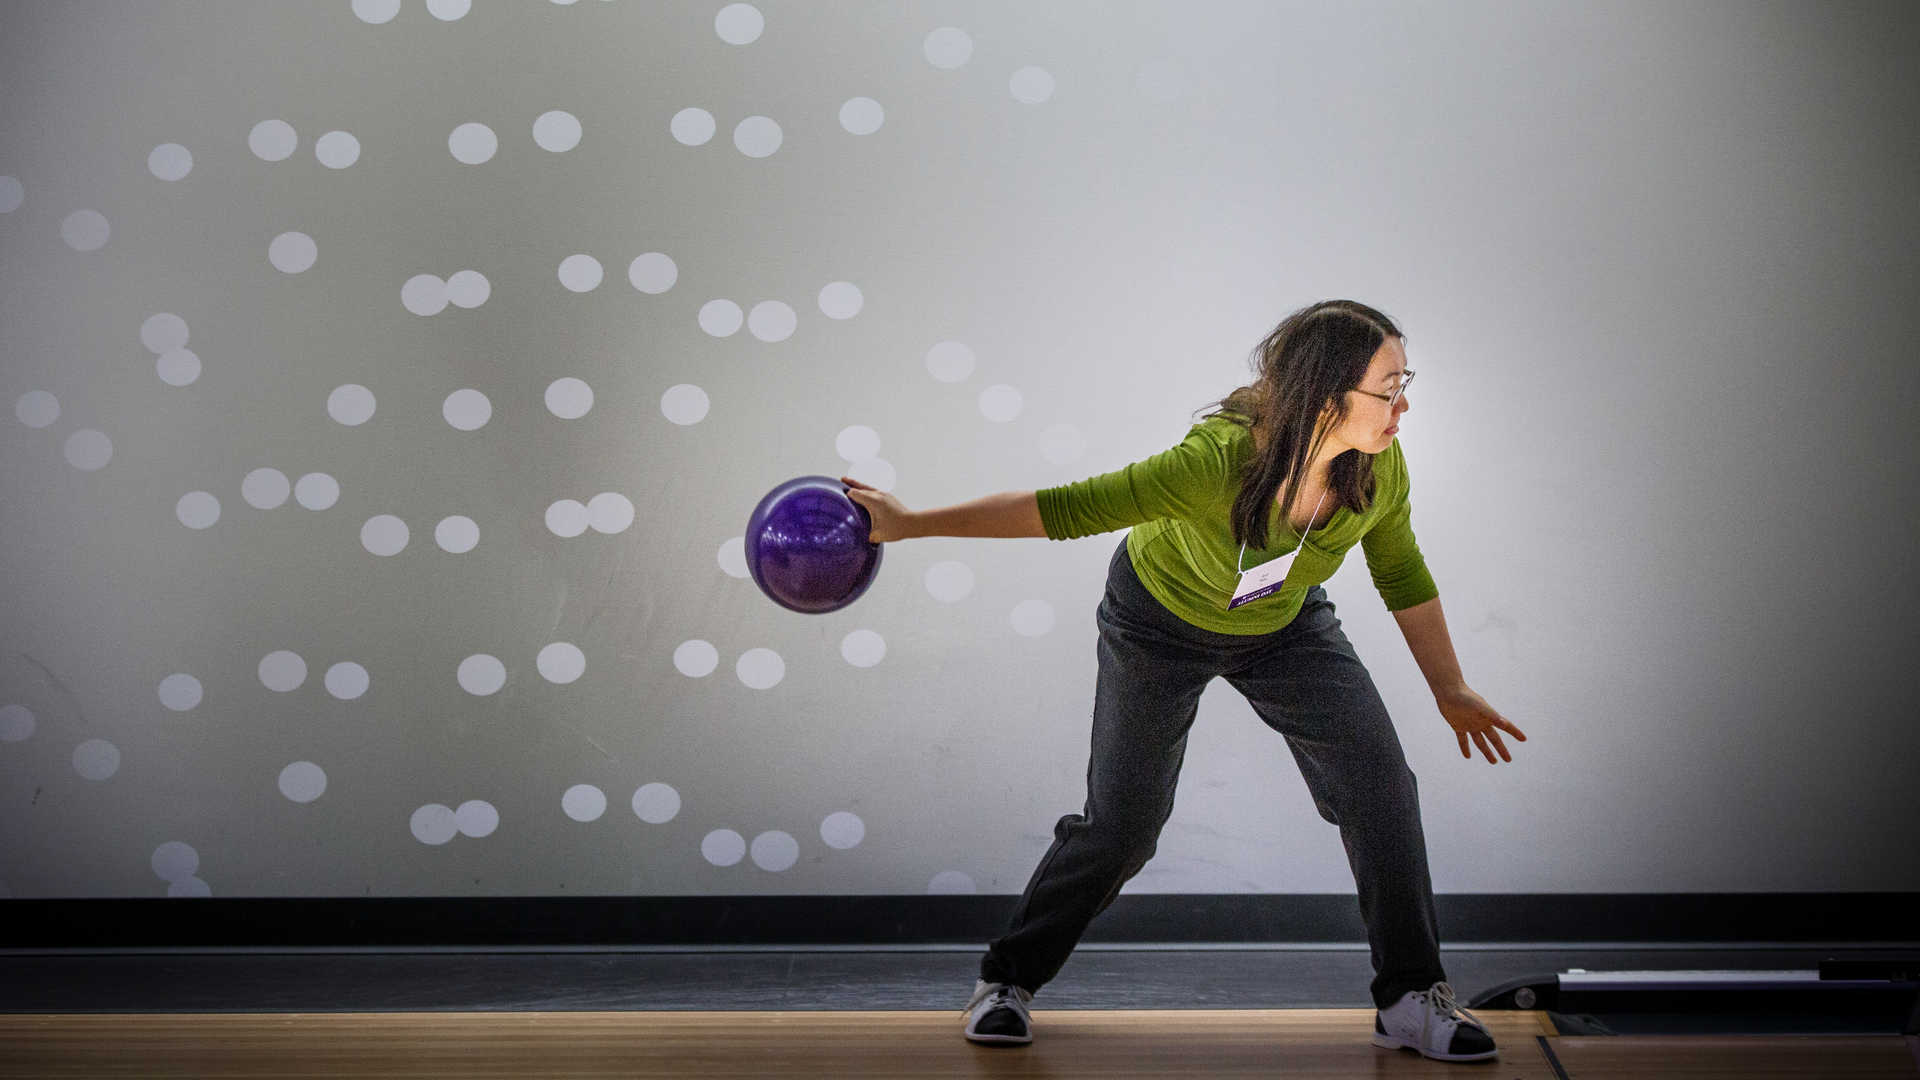 Student holding the bowling ball